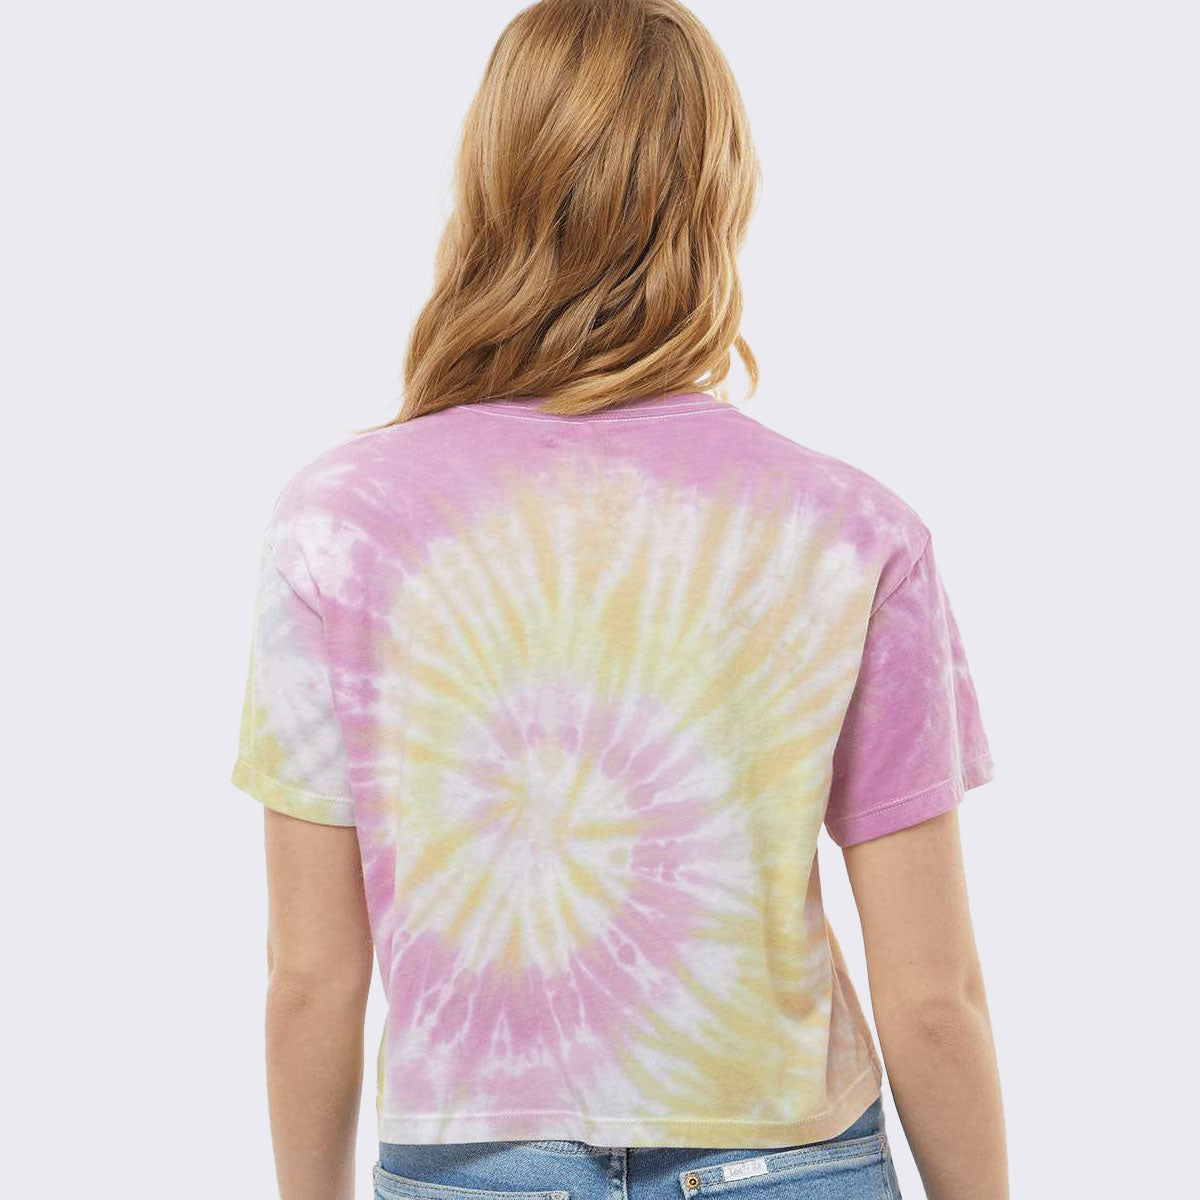 Rest Later Women’s Tie-Dyed Crop T-Shirt